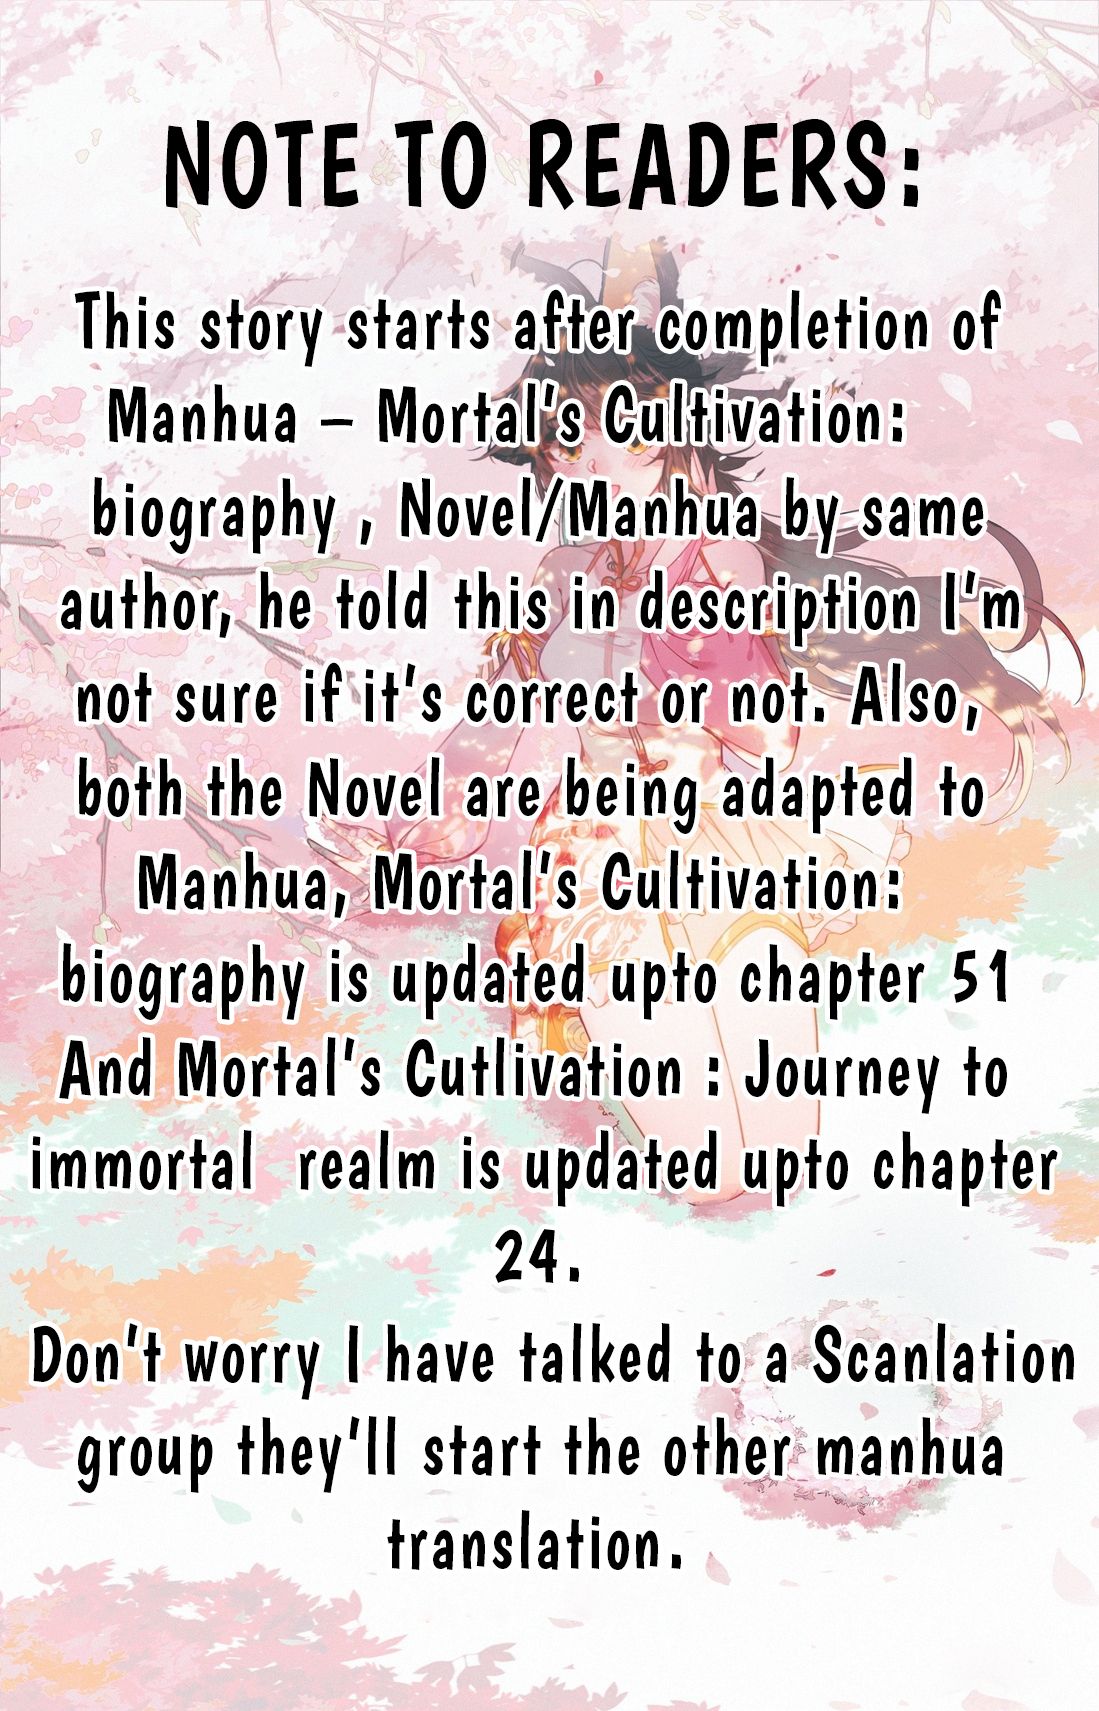 Mortal’S Cultivation: Journey To Immortality - Page 1